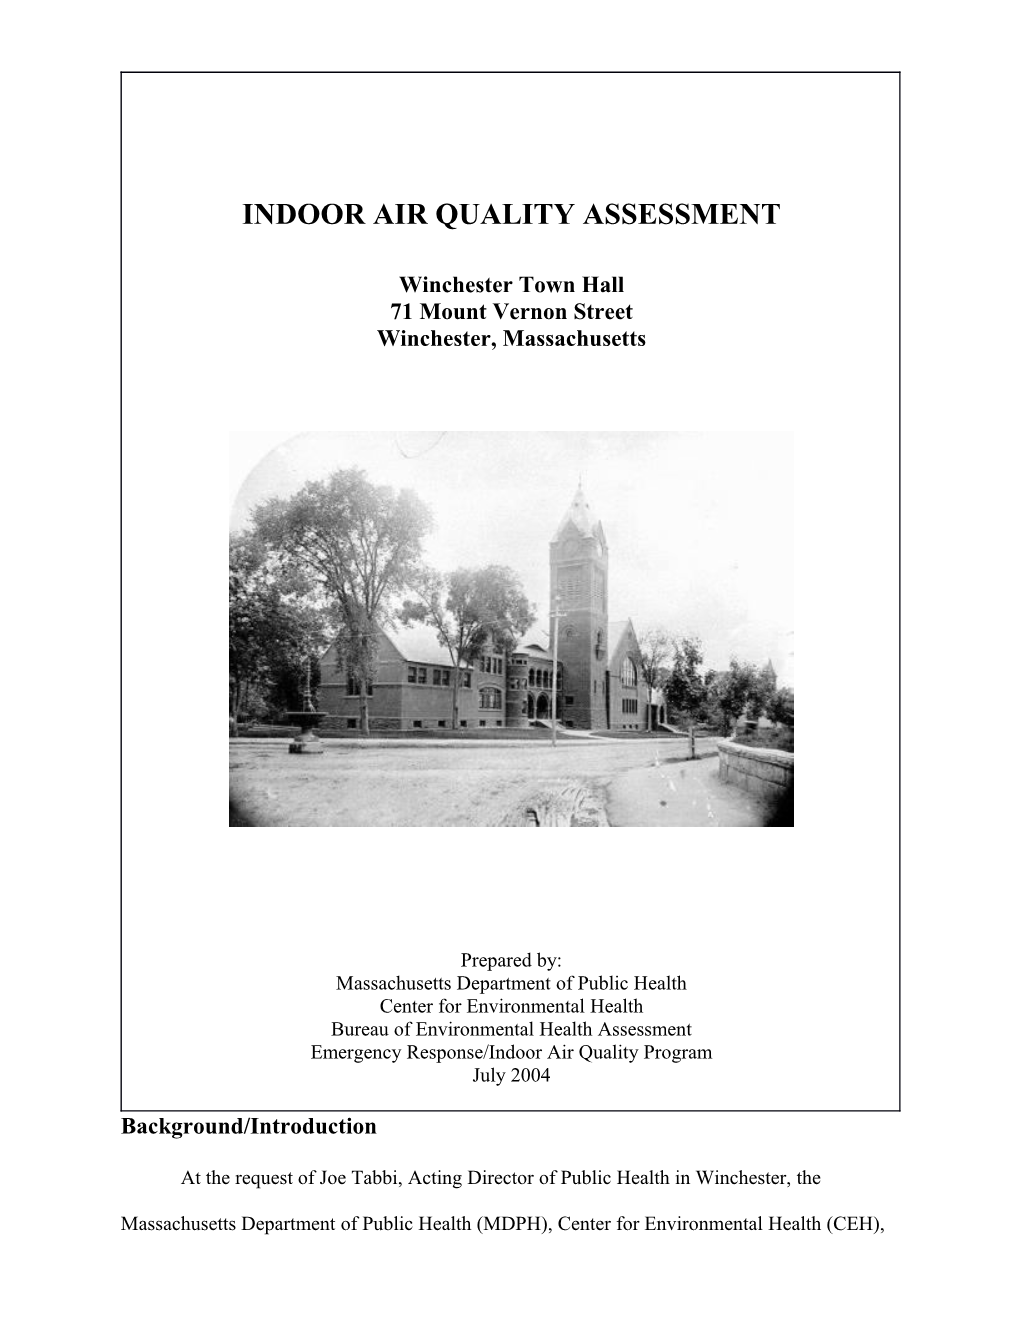 Indoor Air Quality Assessment - Winchester Town Hall - July 2004